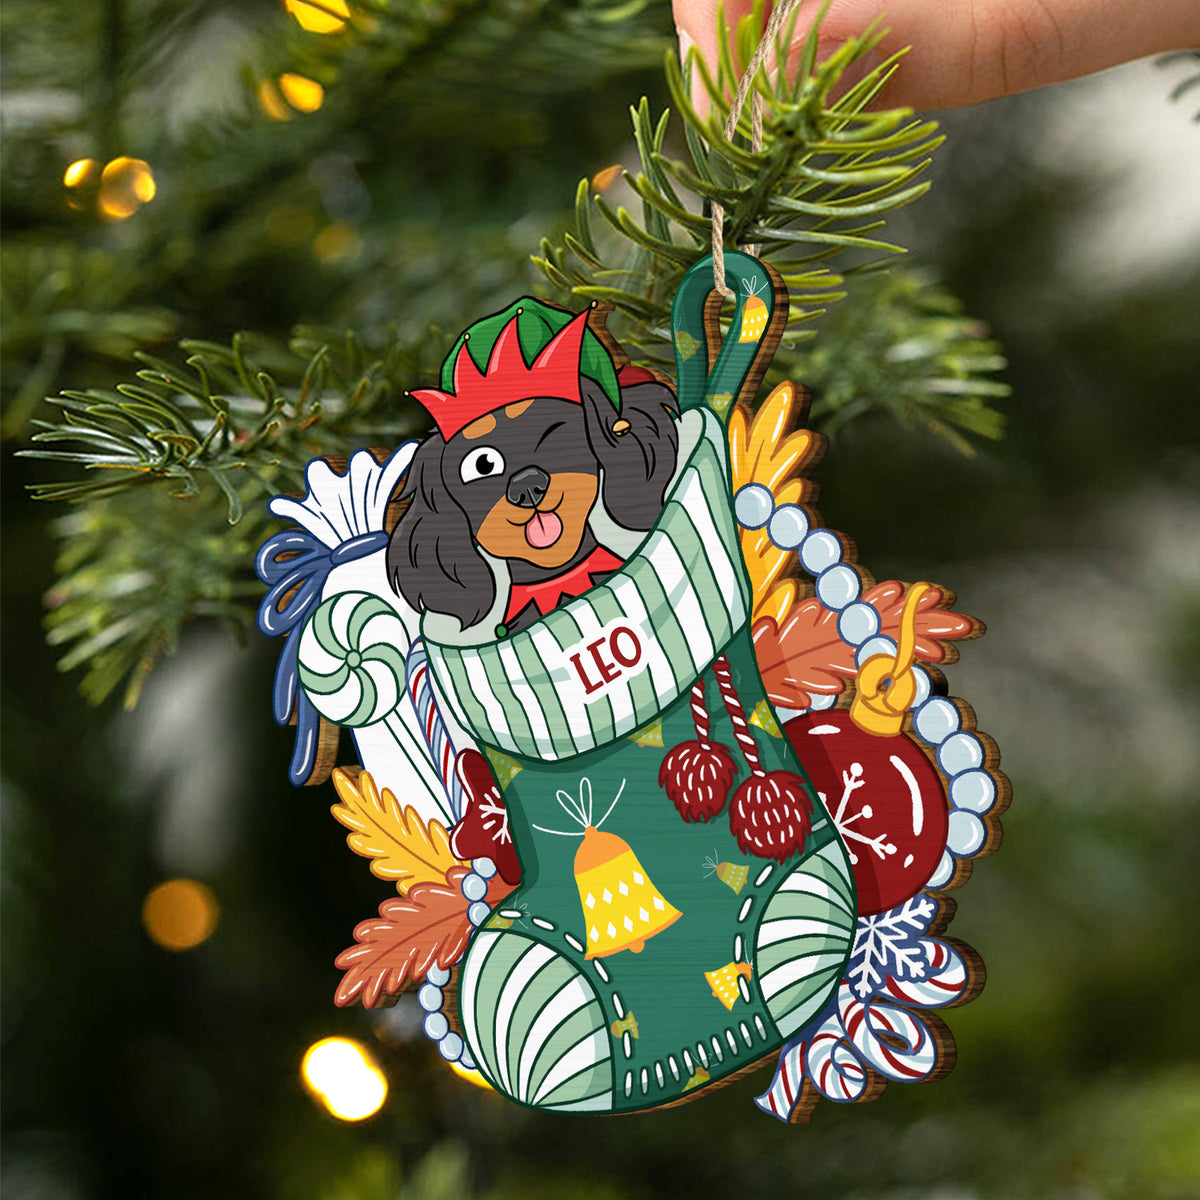 Dogs In Stocking Xmas Pattern - Christmas Gift For Dog Lovers - Personalized Metal Ornament